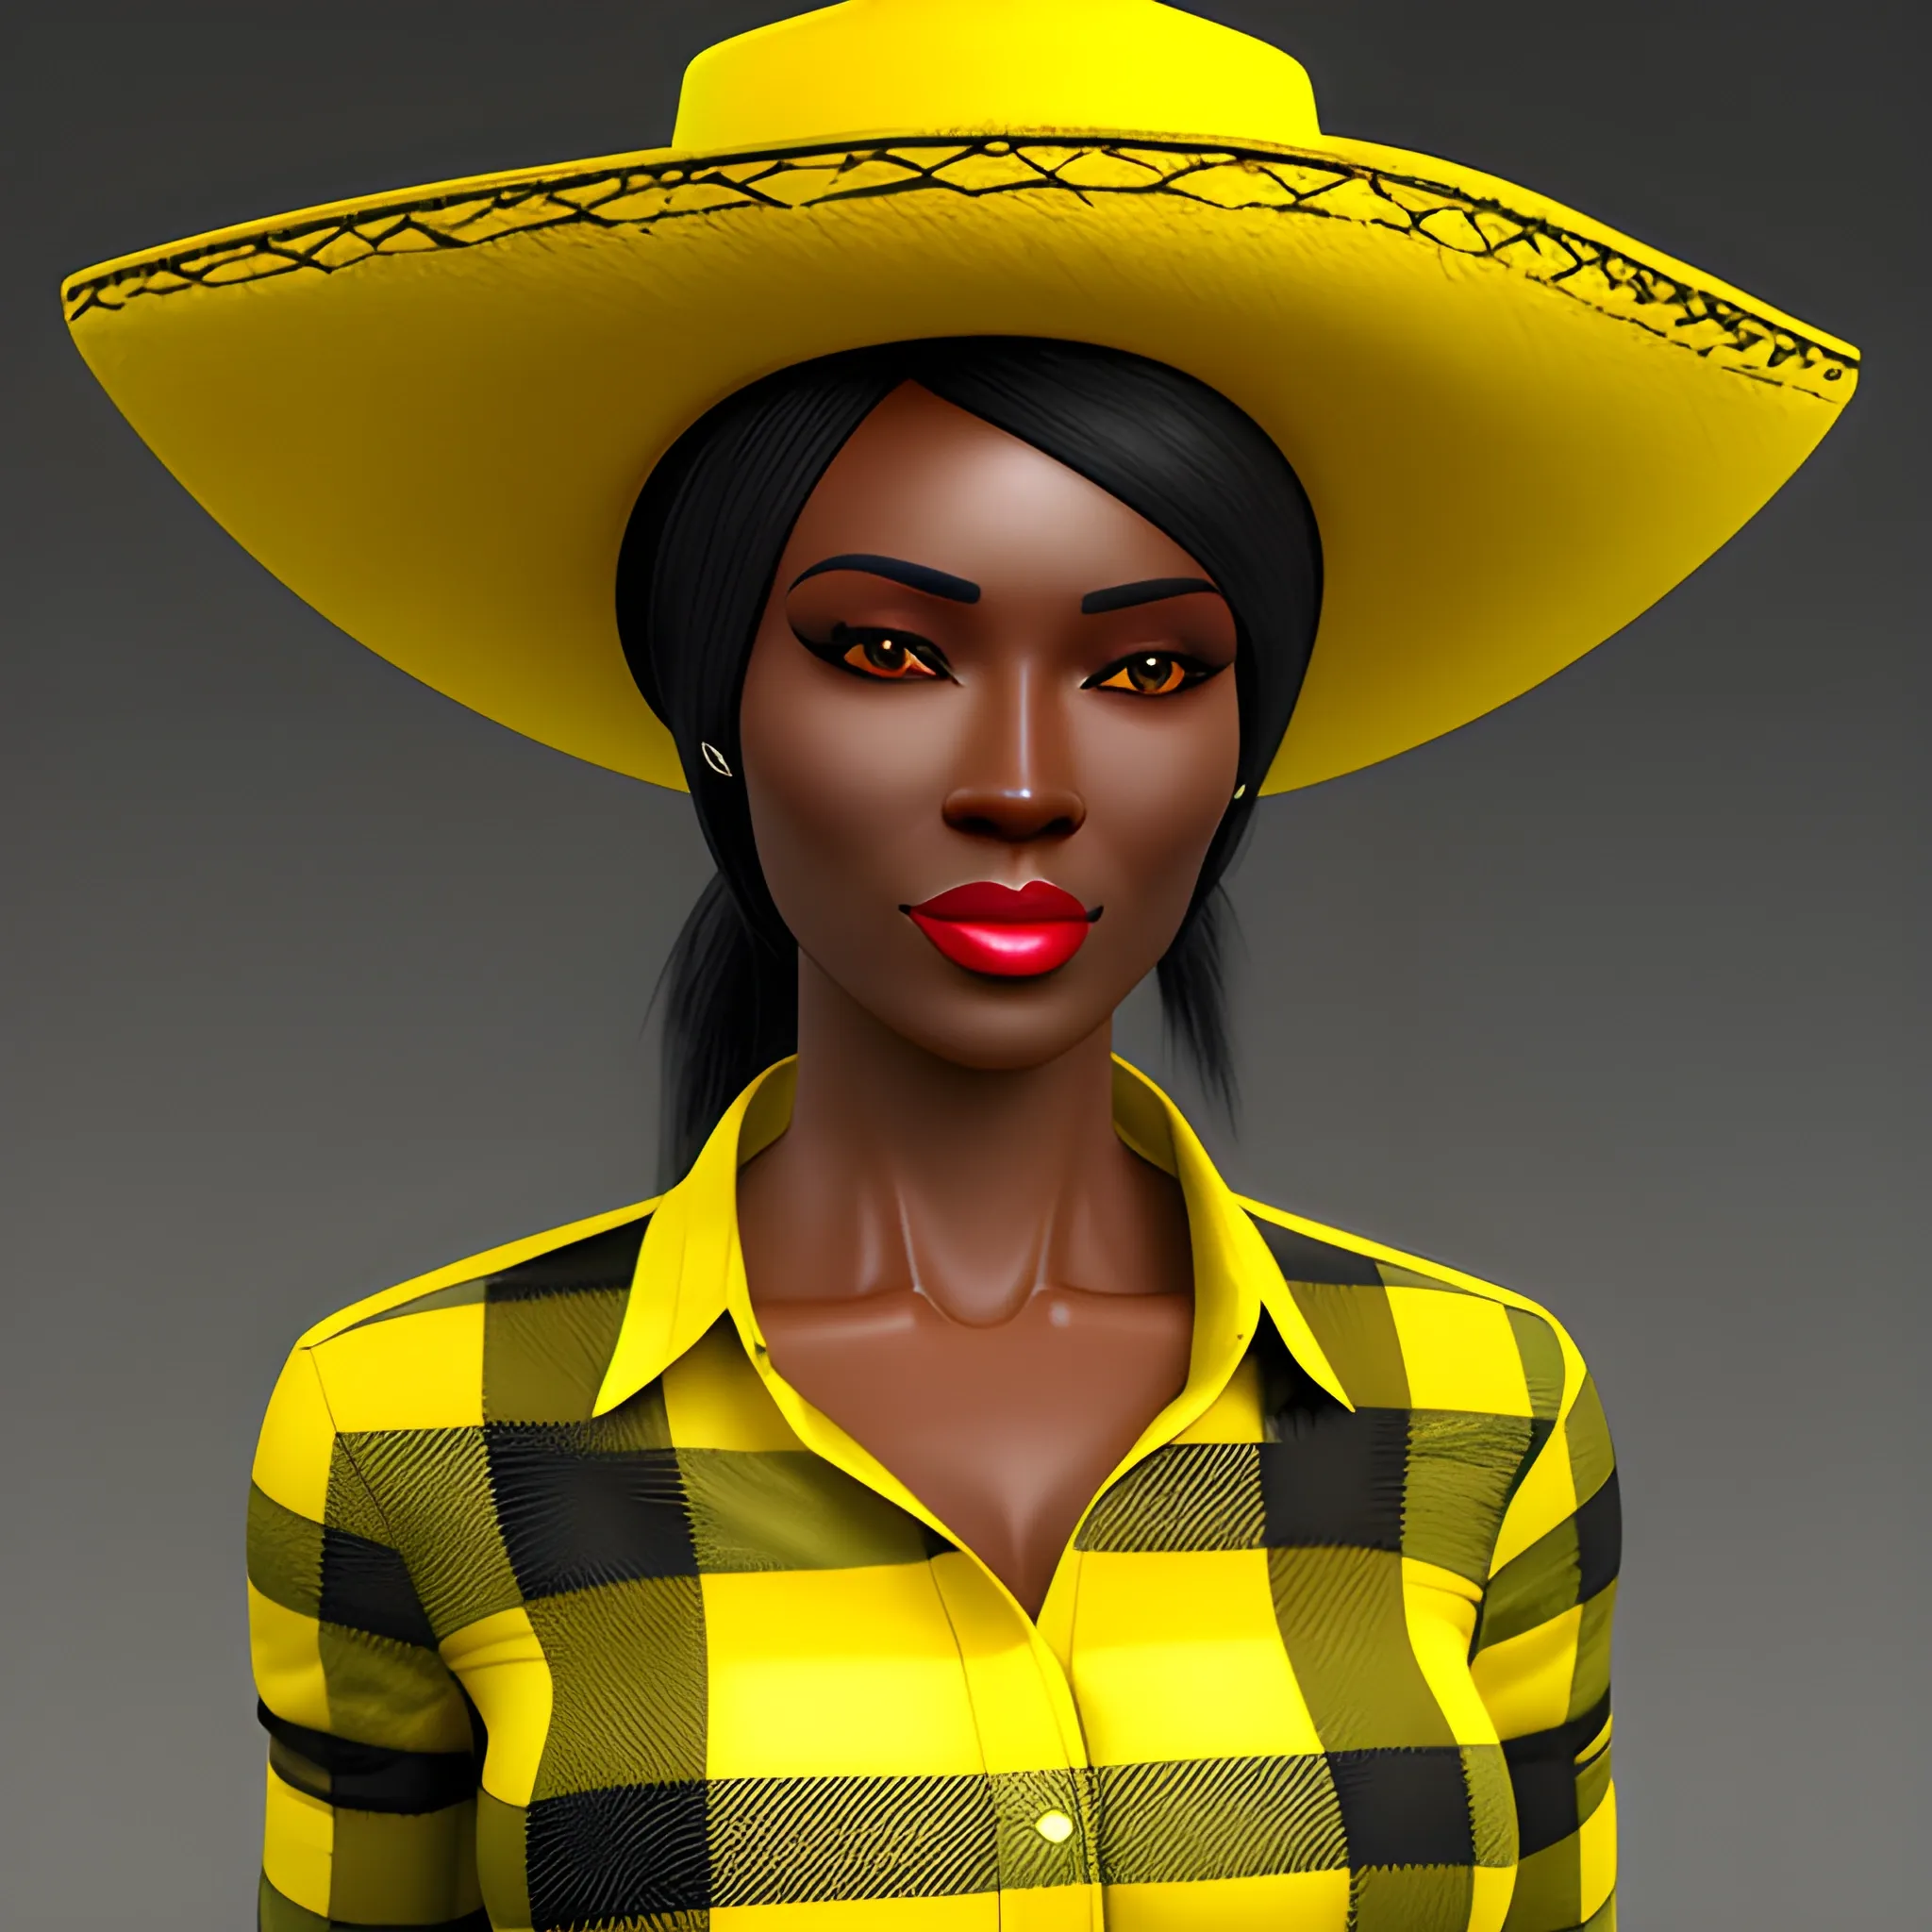 Masterpiece, 3D render, high detail, teen african female, wearing a yellow and bright green cowboy hat, cleft chin, short black hair, black eyes, wearing a flannel shirt, petite figure, 3D